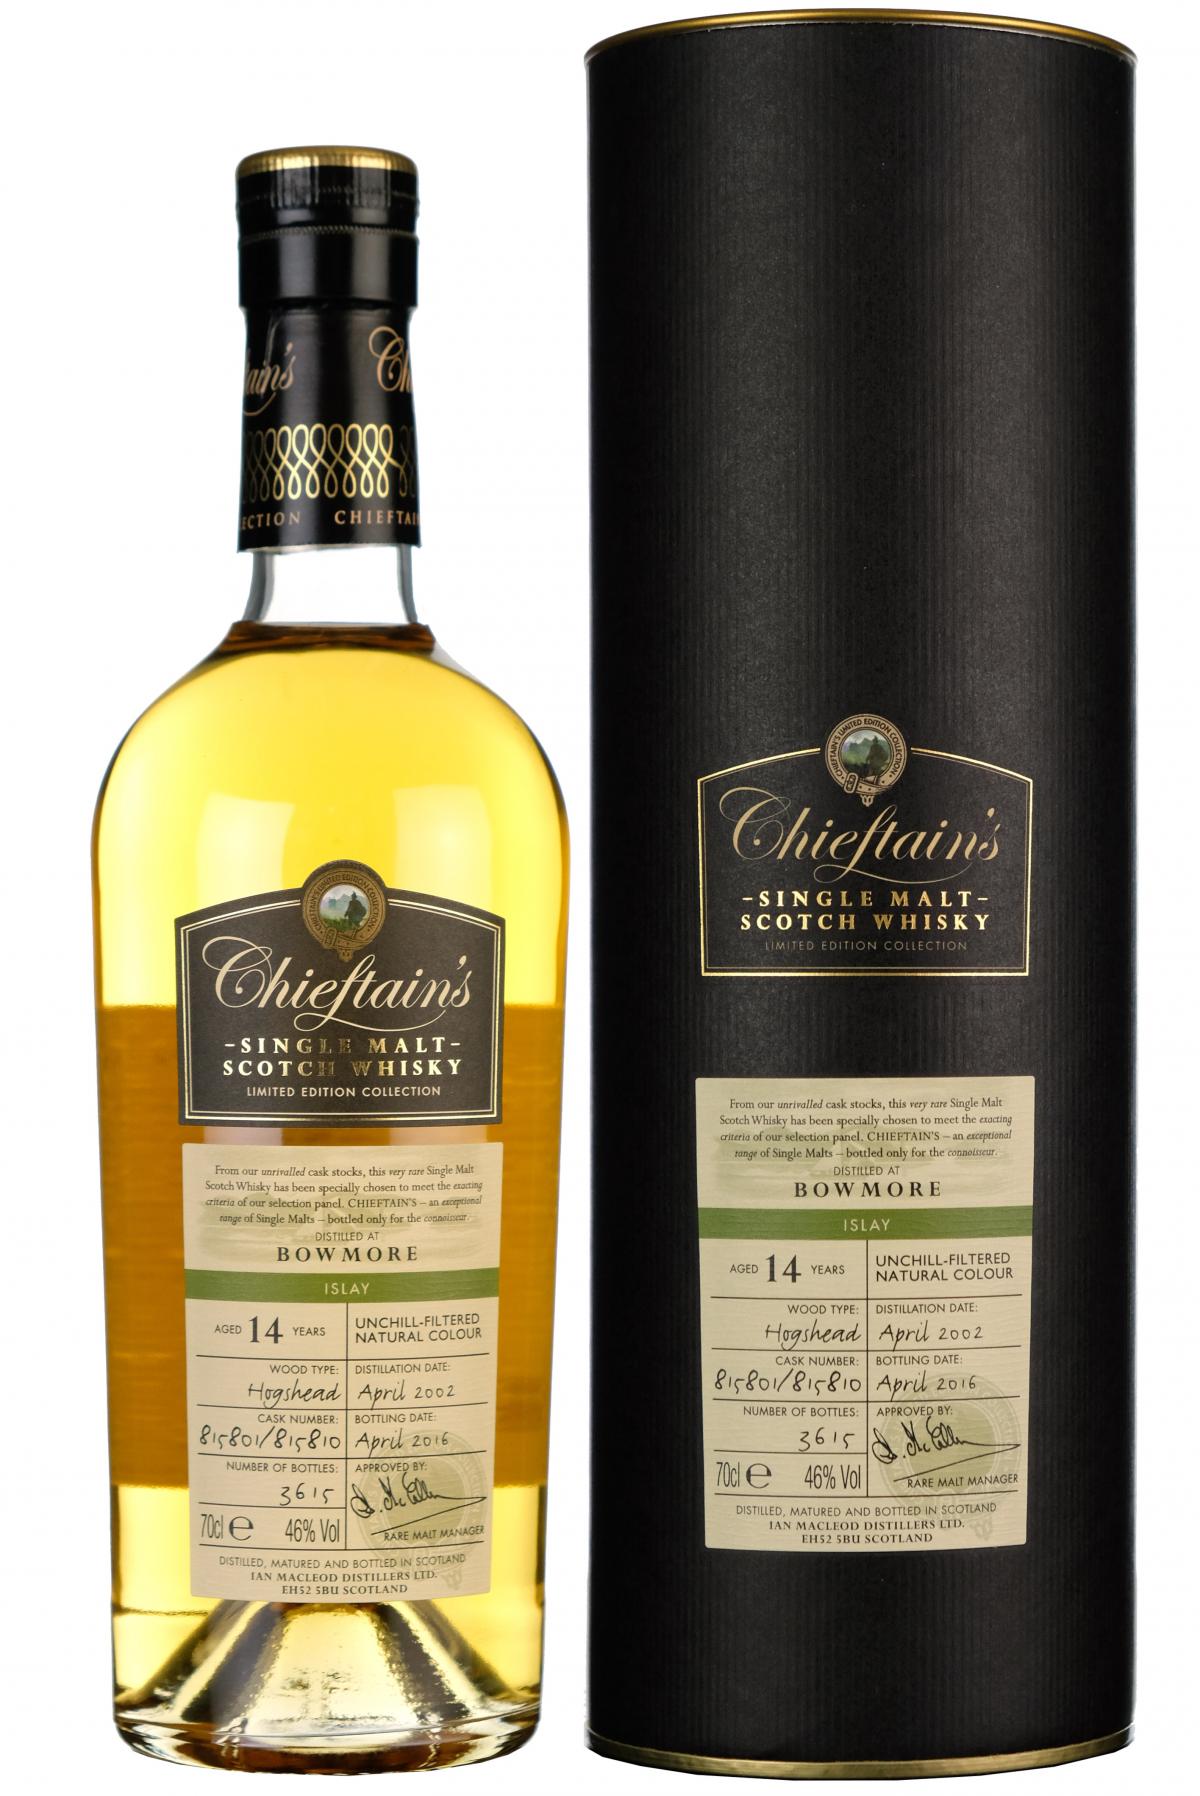 bowmore 14 year old chieftains islay single malt scotch whisky whiskey